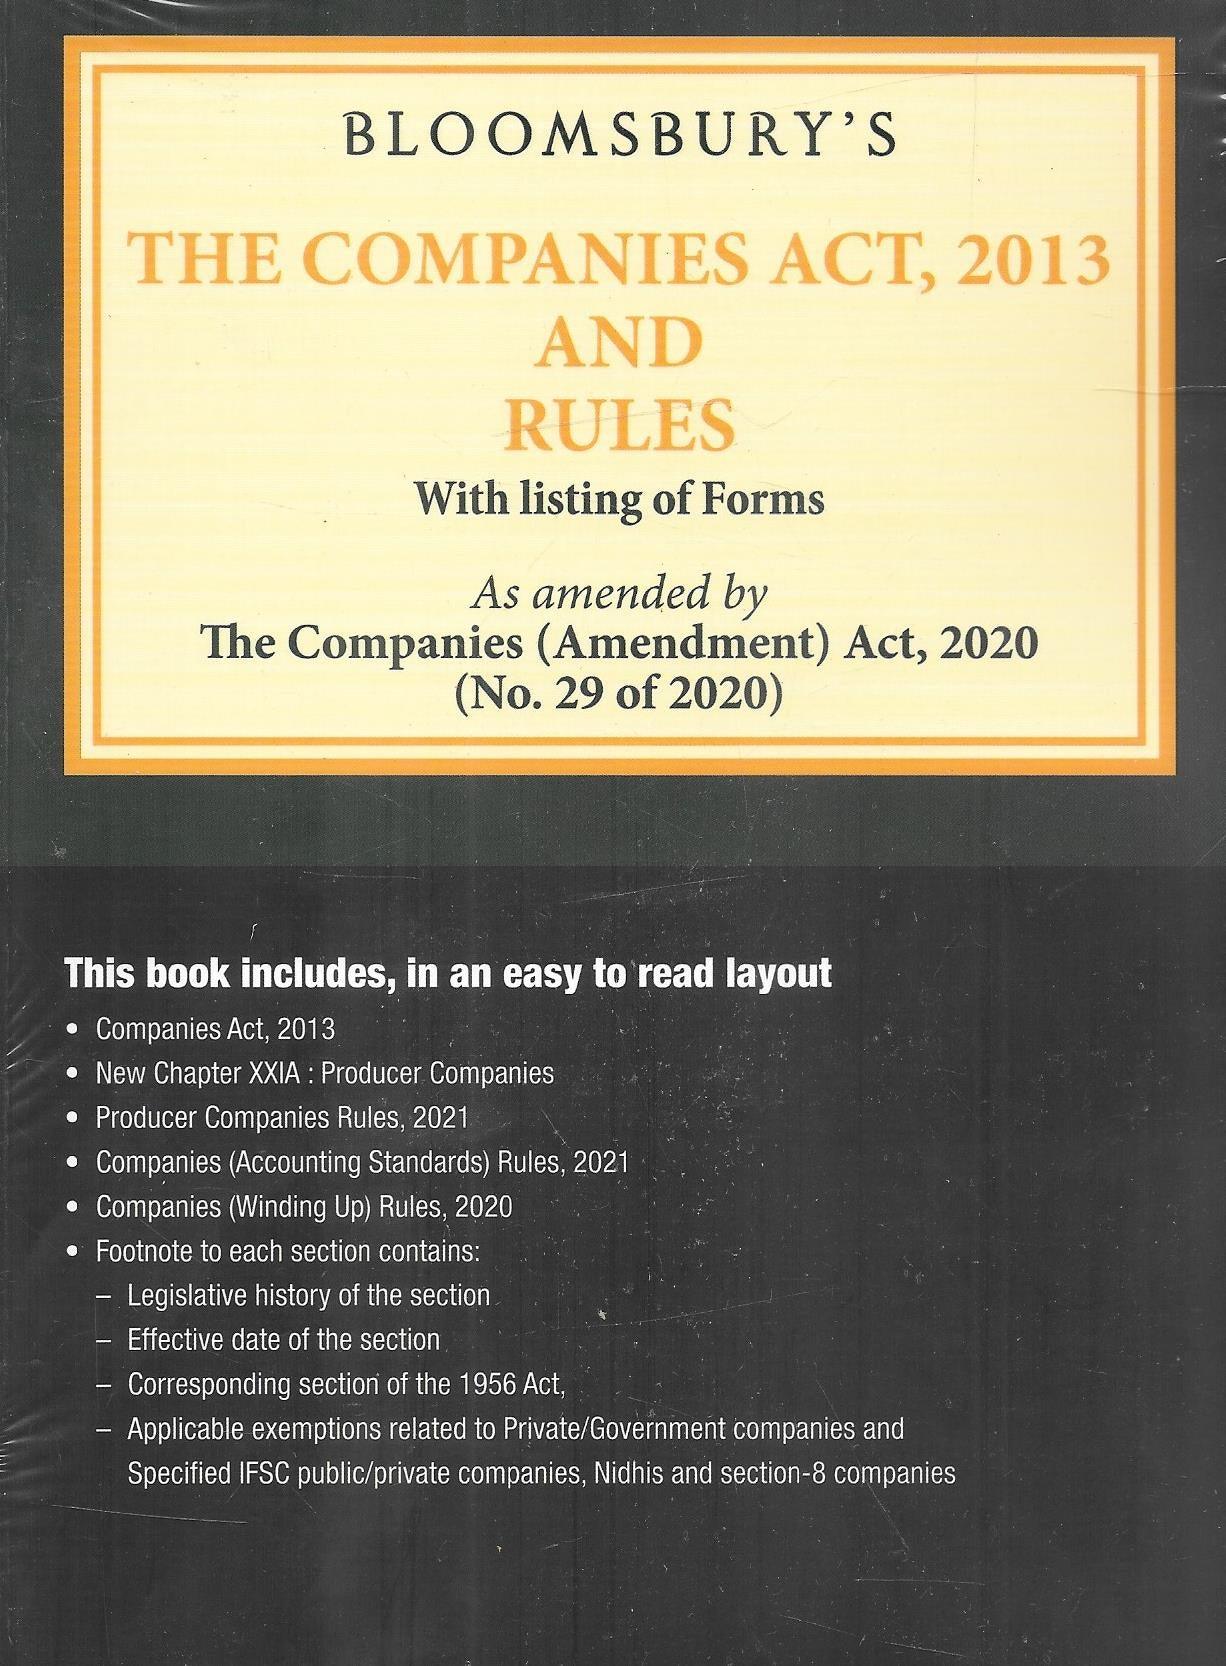 The Companies Act, 2013 and Rules, 6e - M&J Services